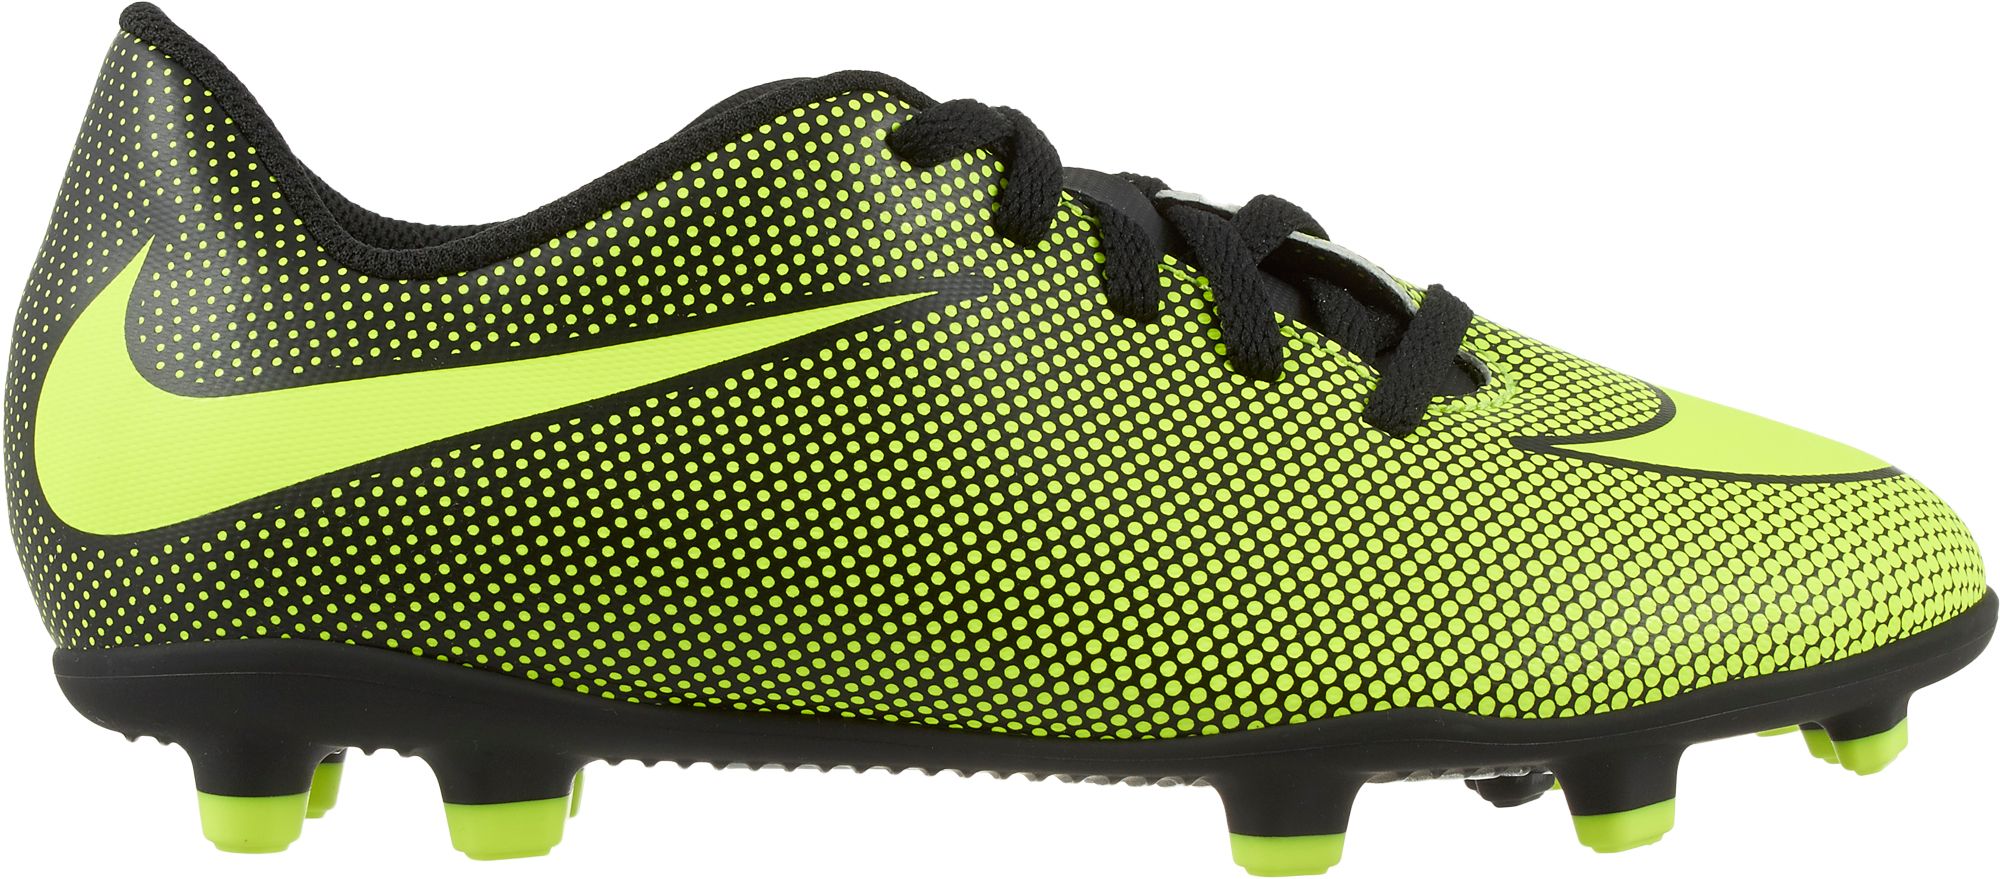 neon green soccer cleats